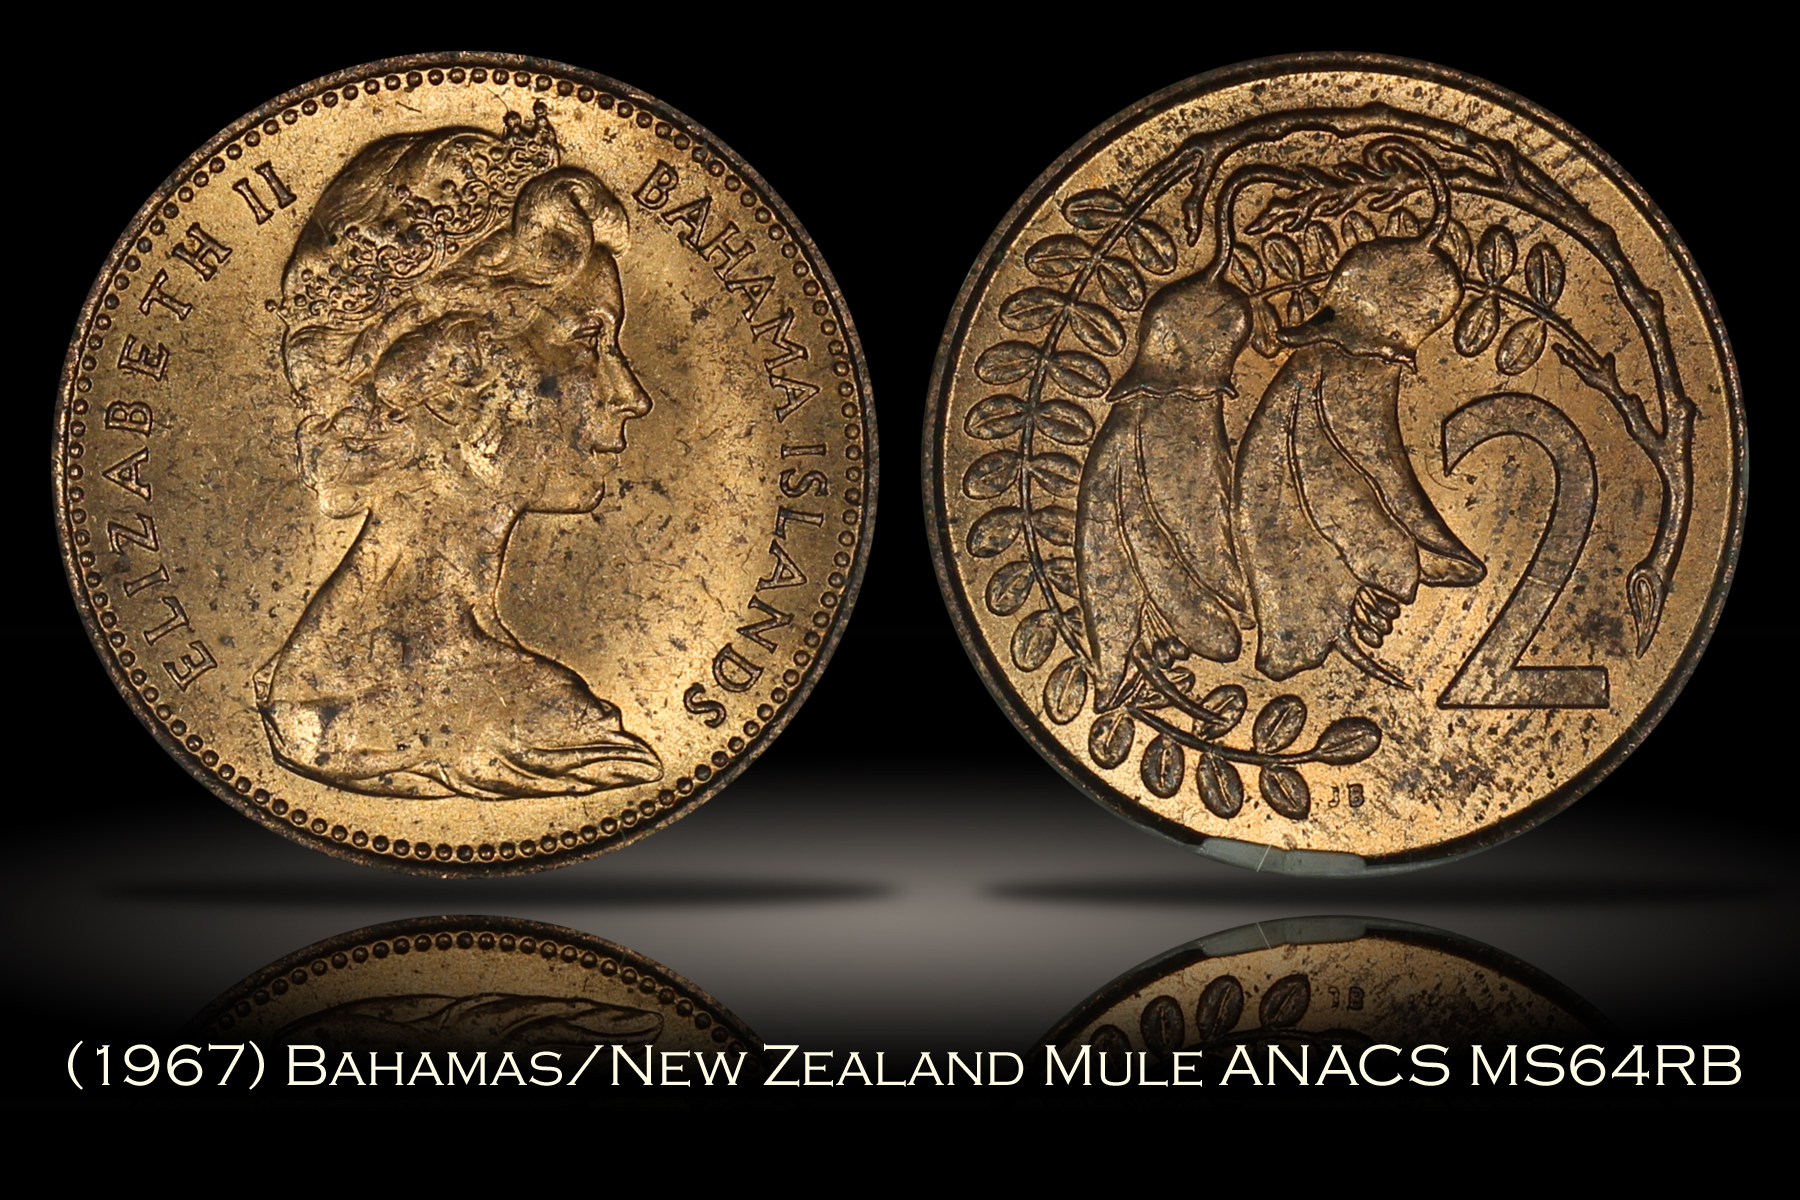 1967 Bahamas/New Zealand Two Cent Mule ANACS MS64RB